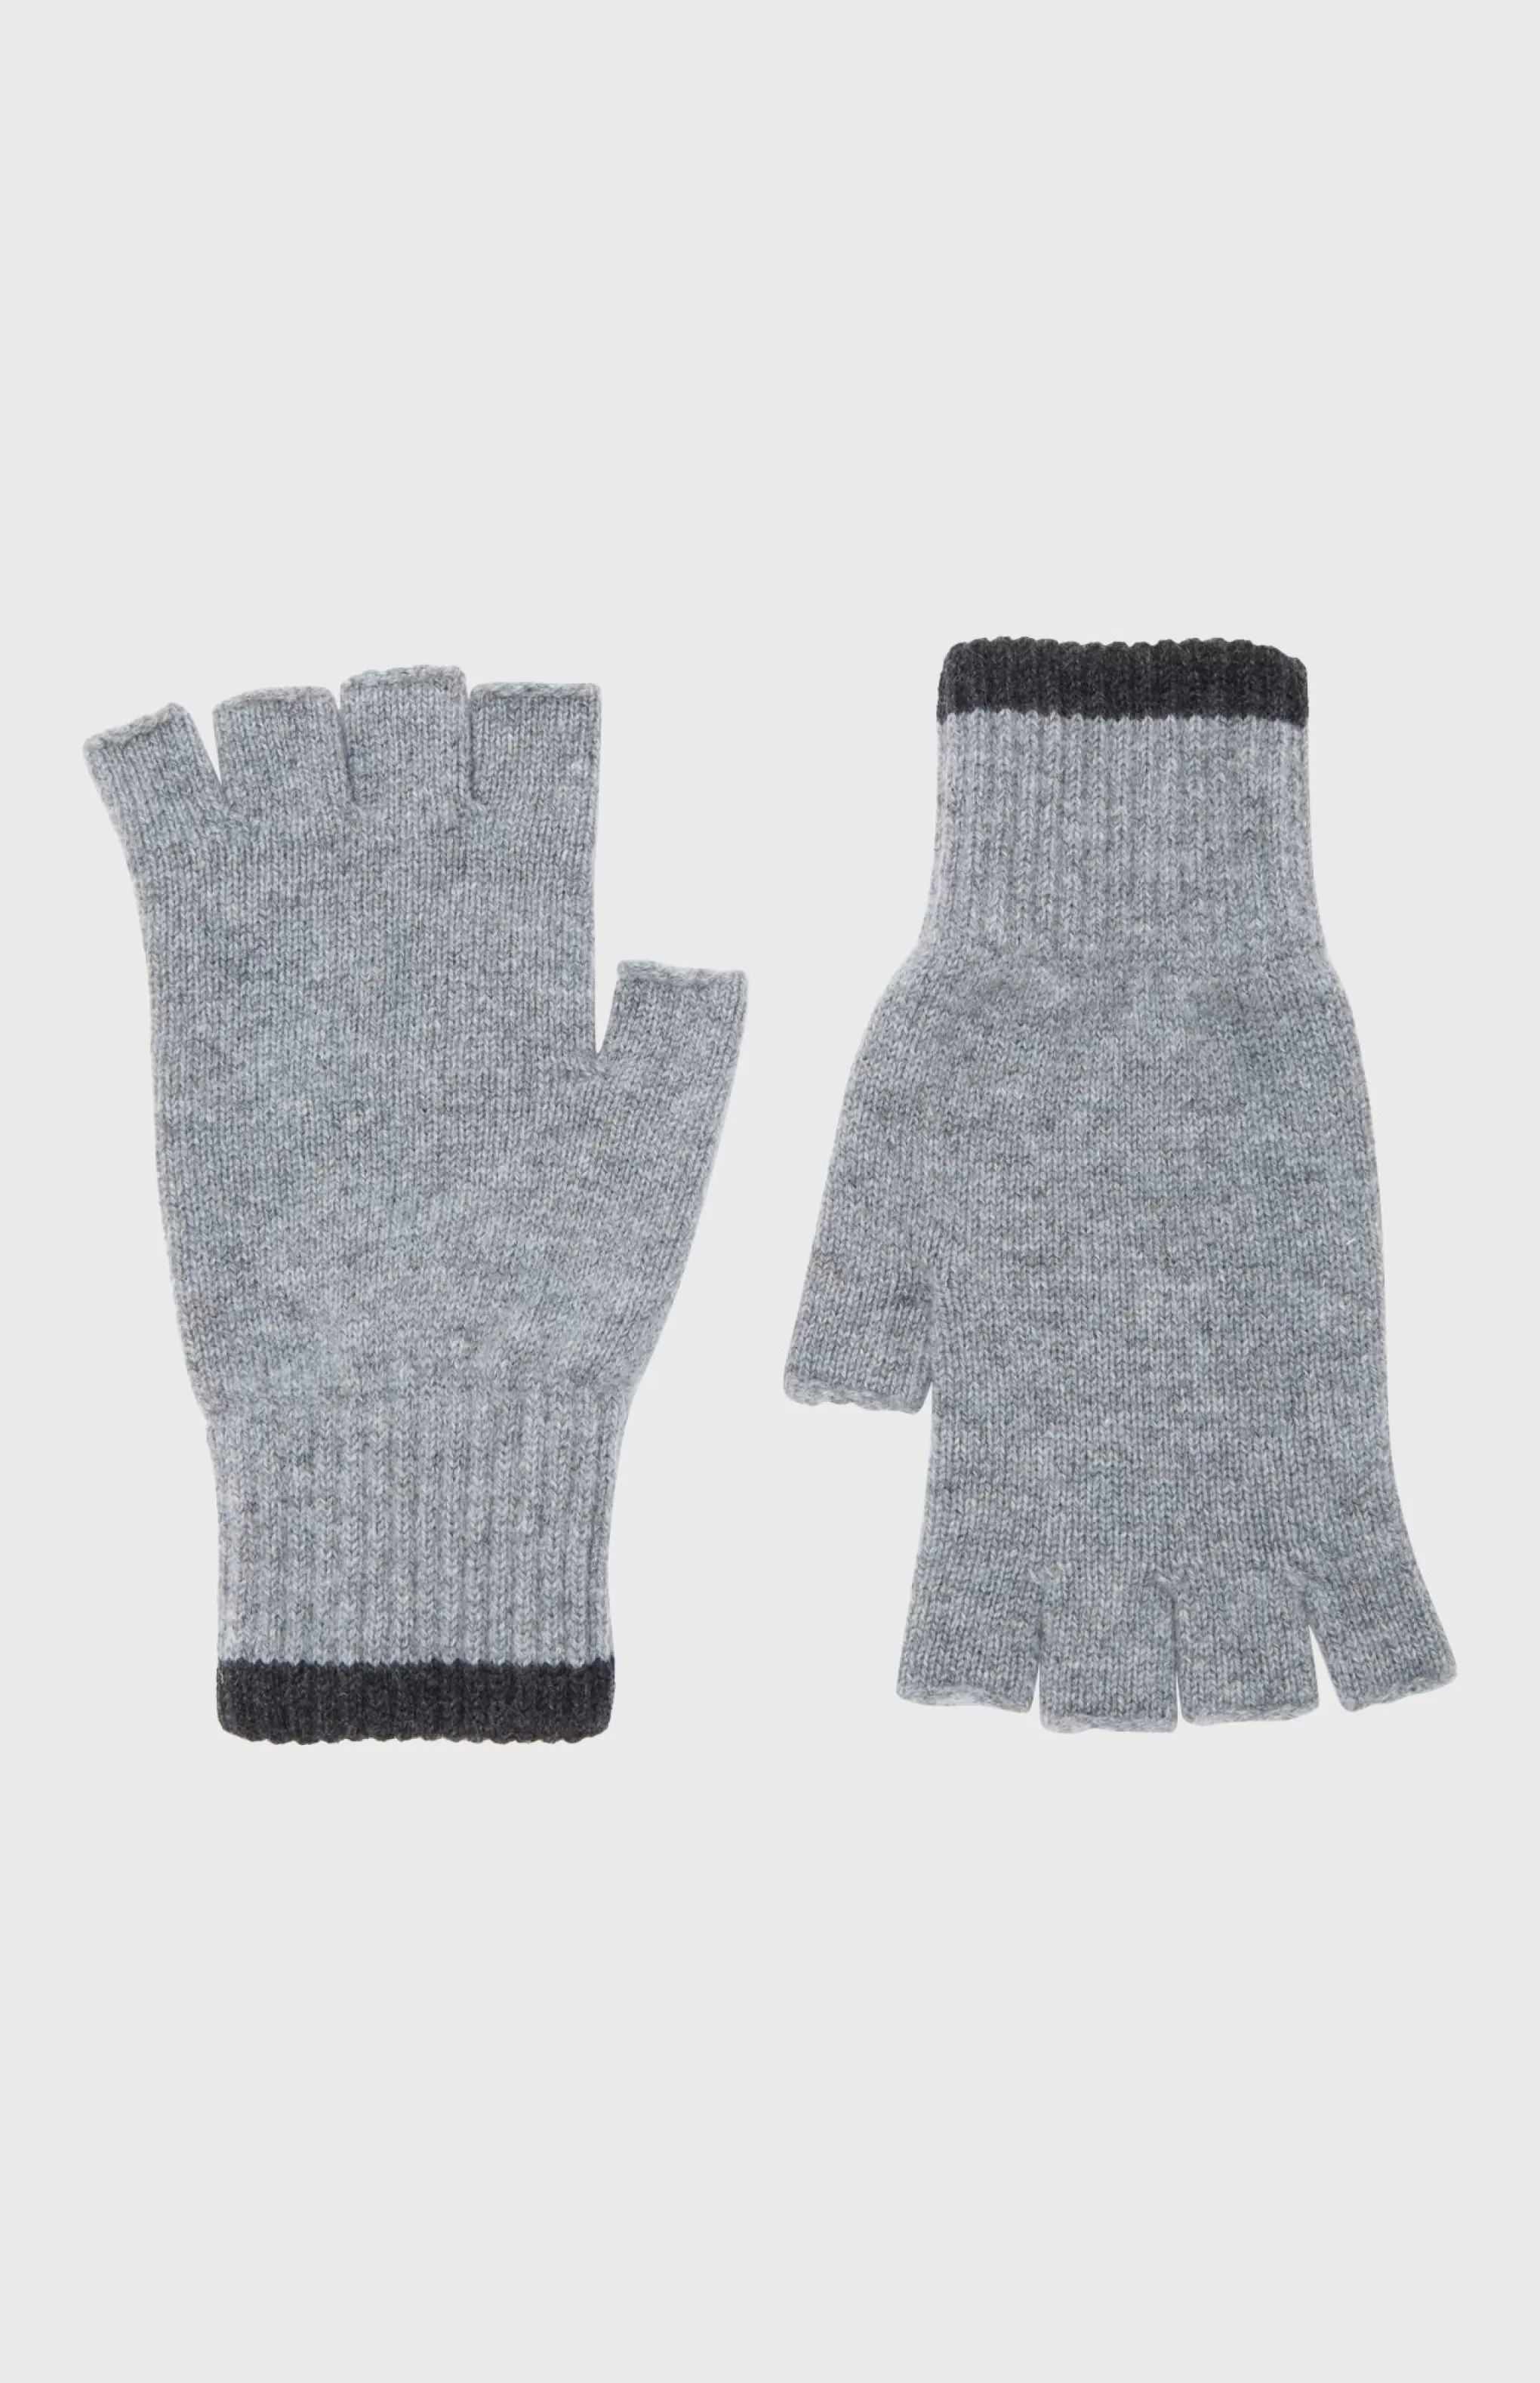 Cheap Cashmere Fingerless Gloves Contrast Ribs In Flannel Grey And Charcoal Men Gloves